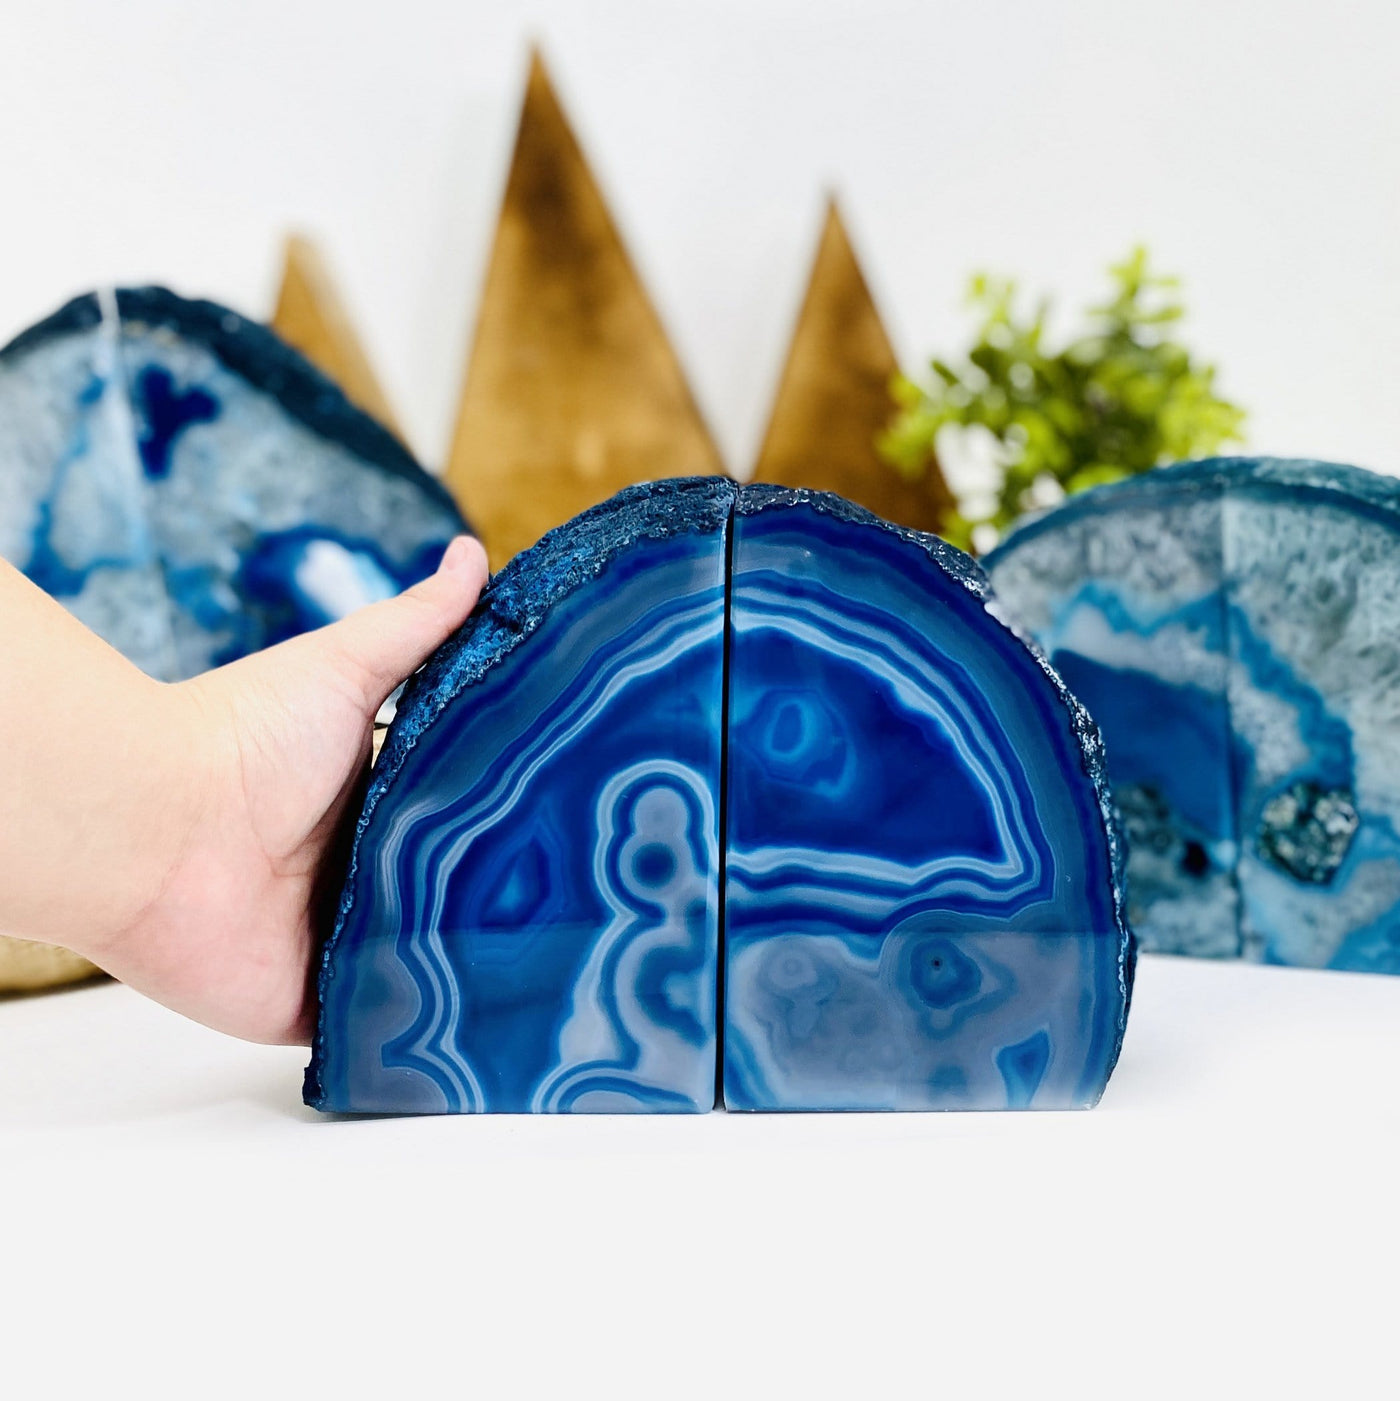 blue agate bookend with a hand next to it